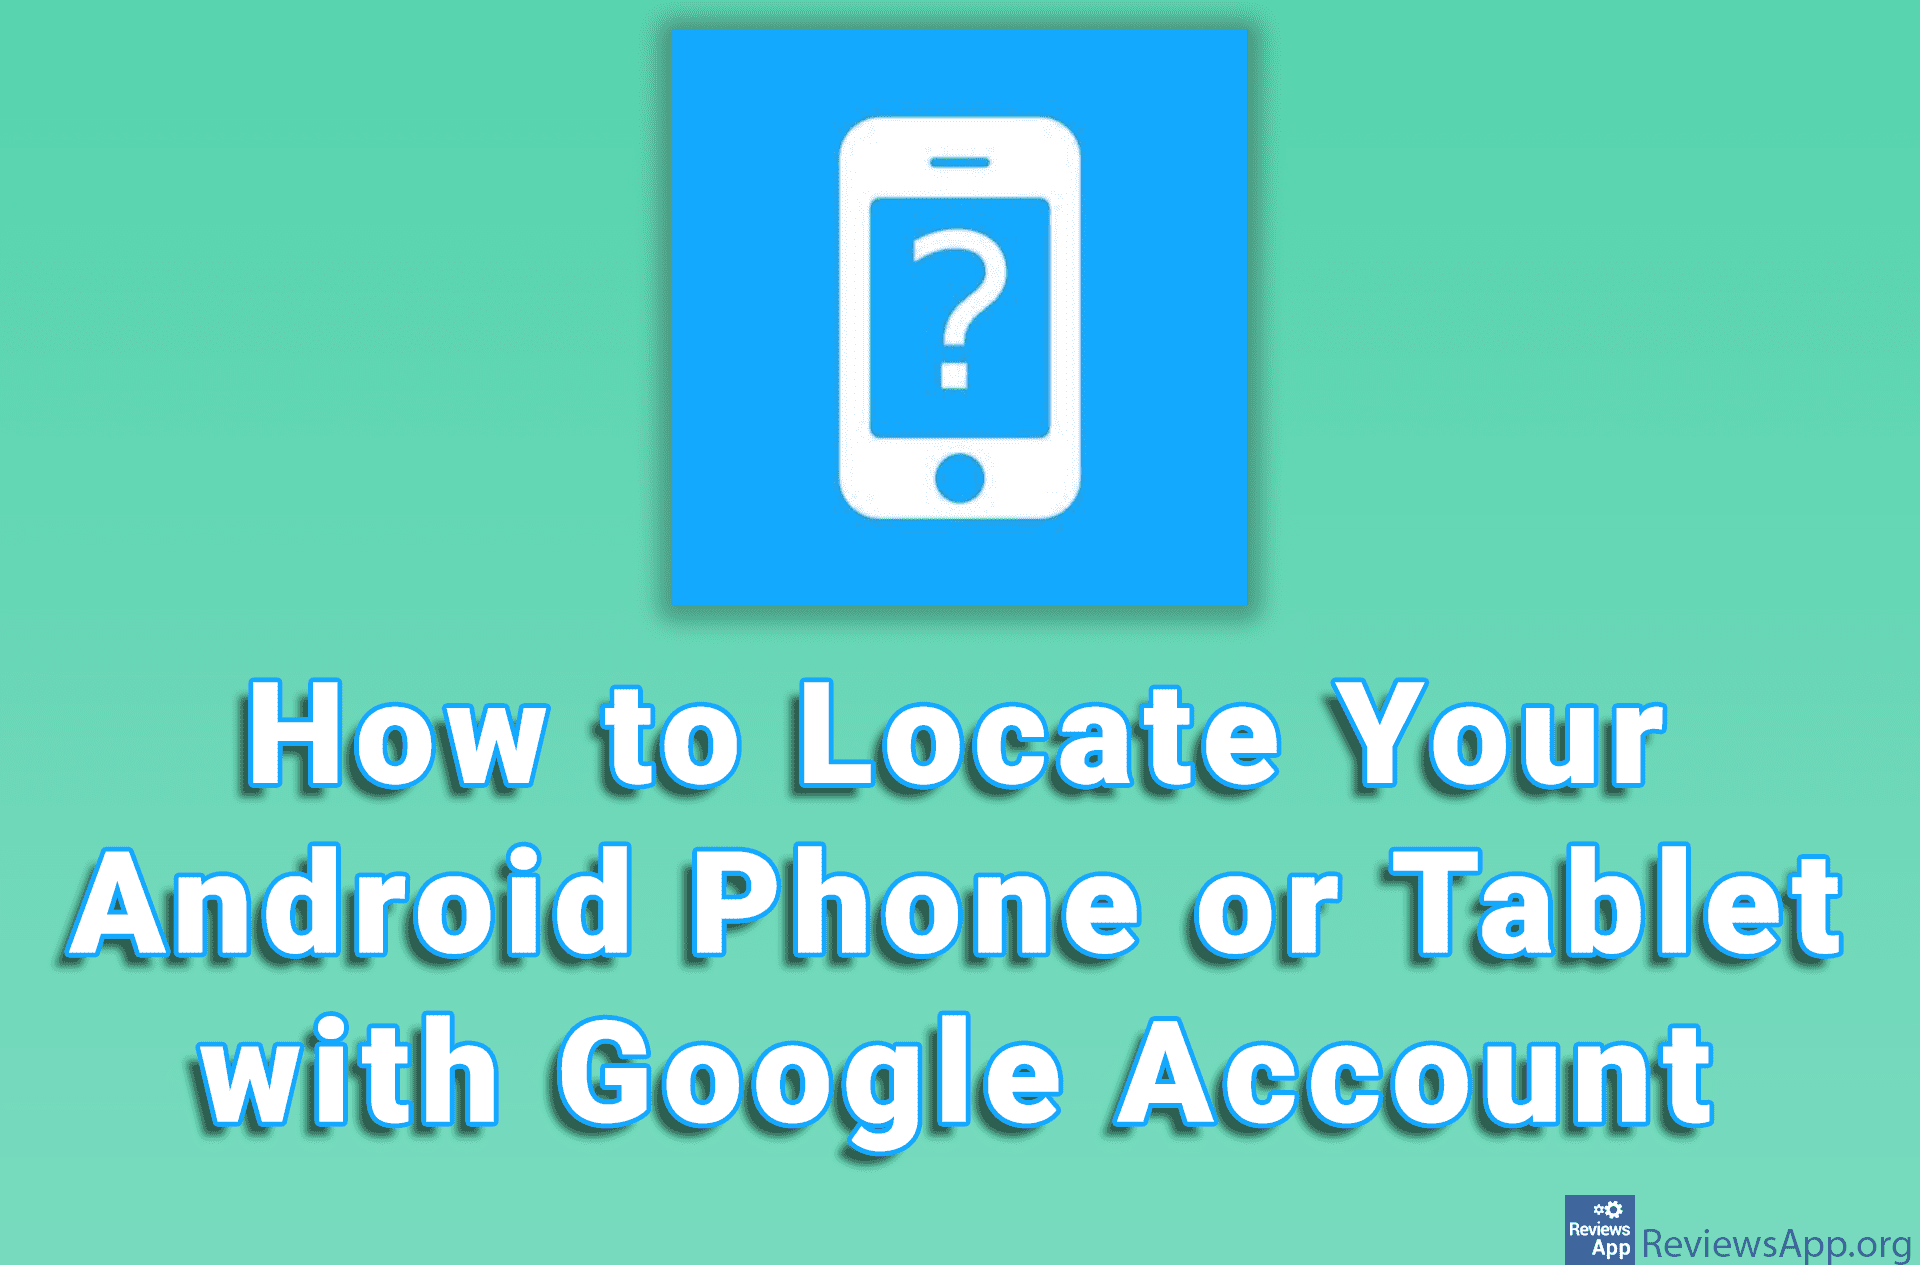 How to Locate Your Android Phone or Tablet with Google Account